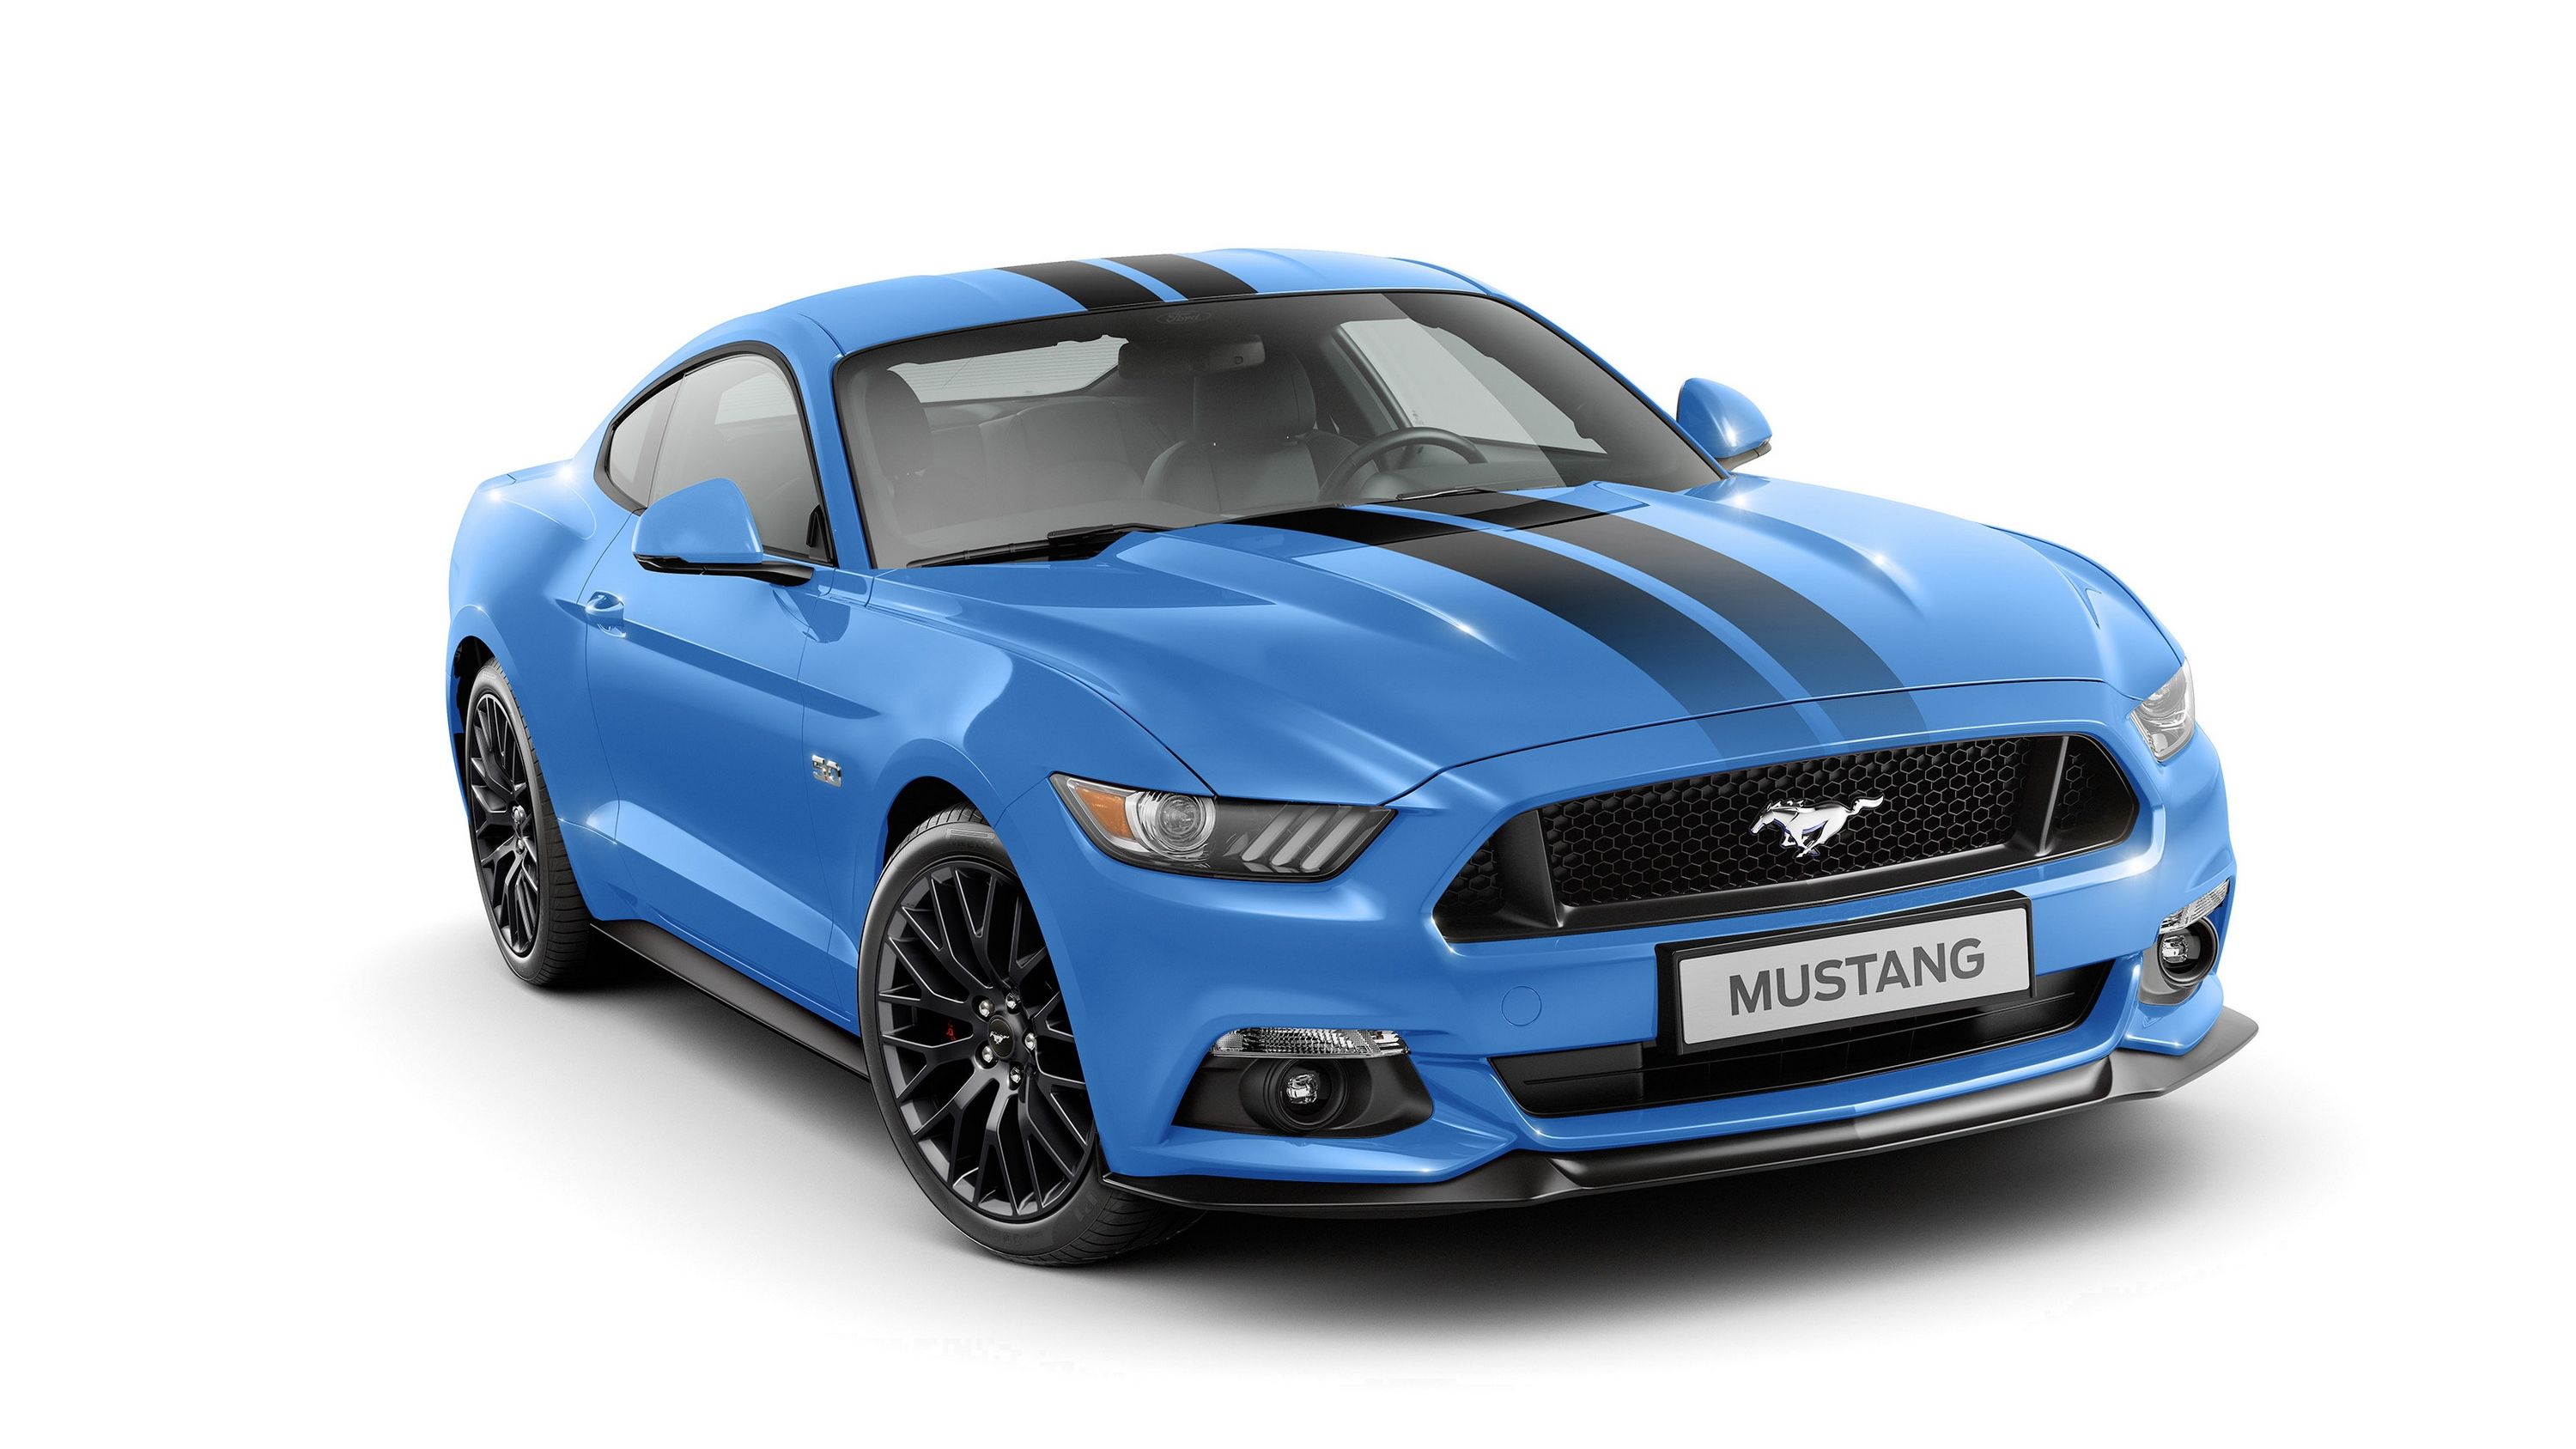 2017 Ford Mustang Blue Edition